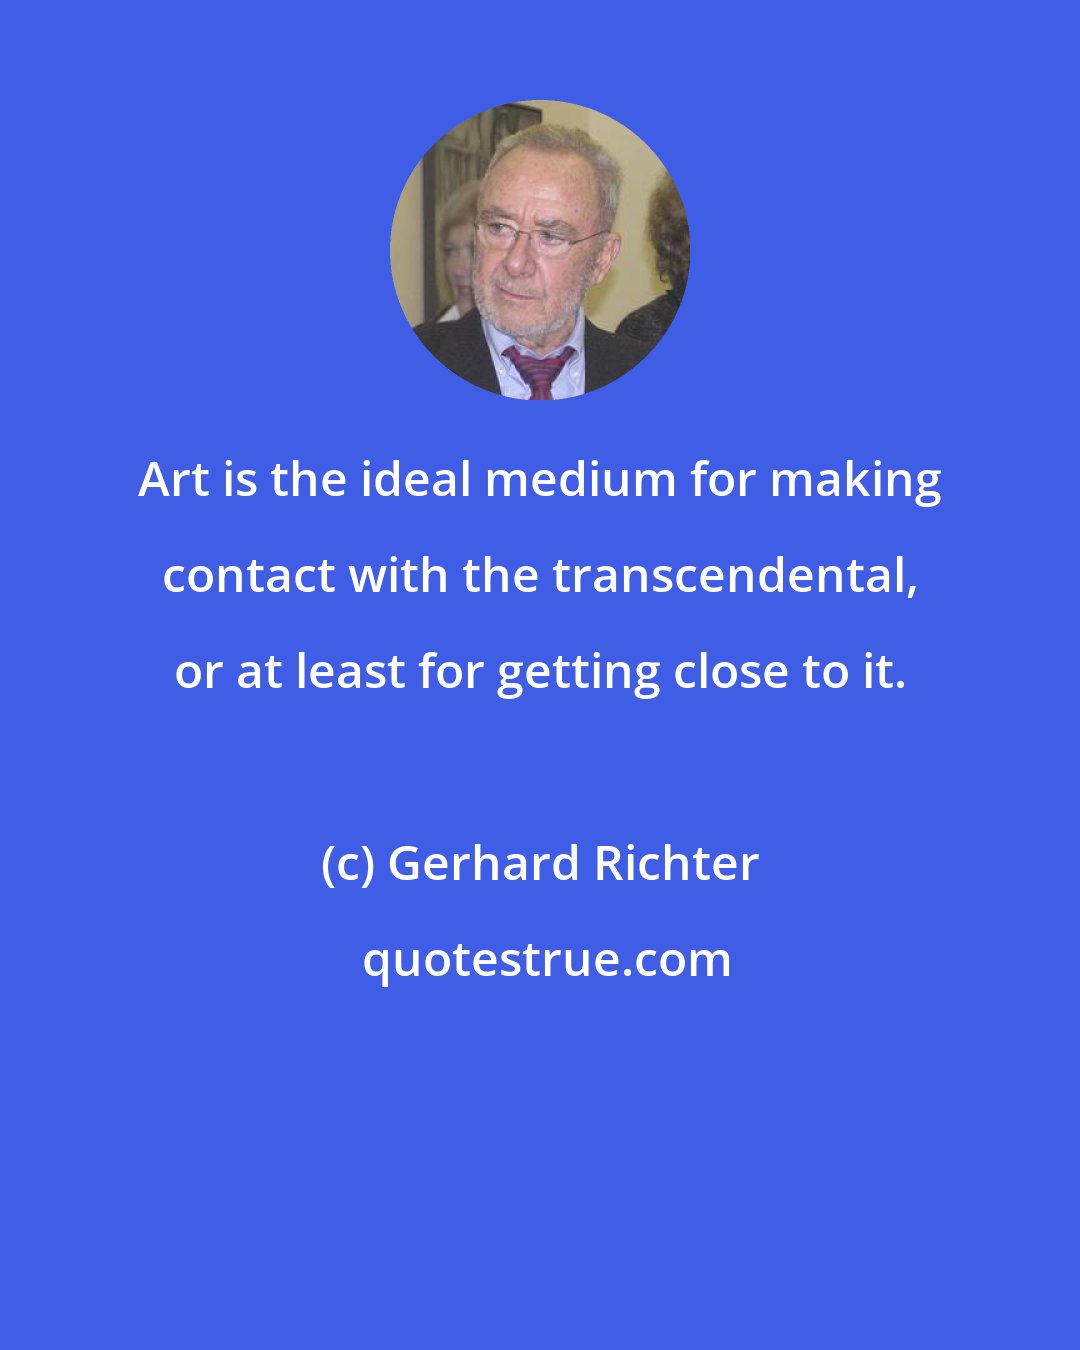 Gerhard Richter: Art is the ideal medium for making contact with the transcendental, or at least for getting close to it.